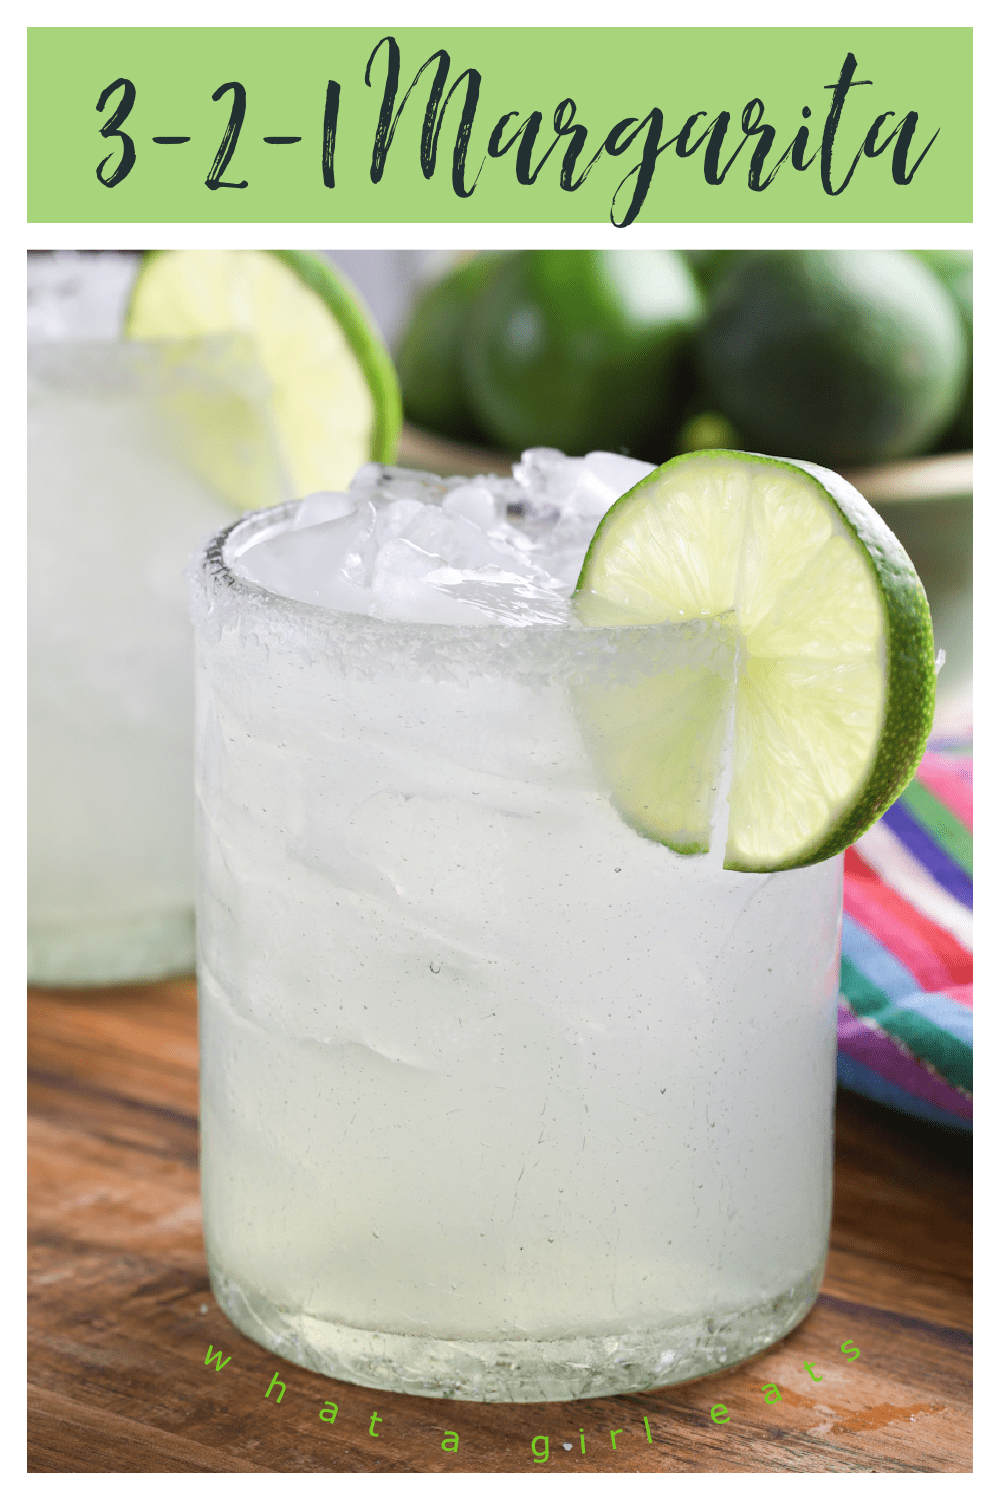 This recipe for a 3-2-1 Margarita is all you'll ever need to make 1 or 100 Margaritas!